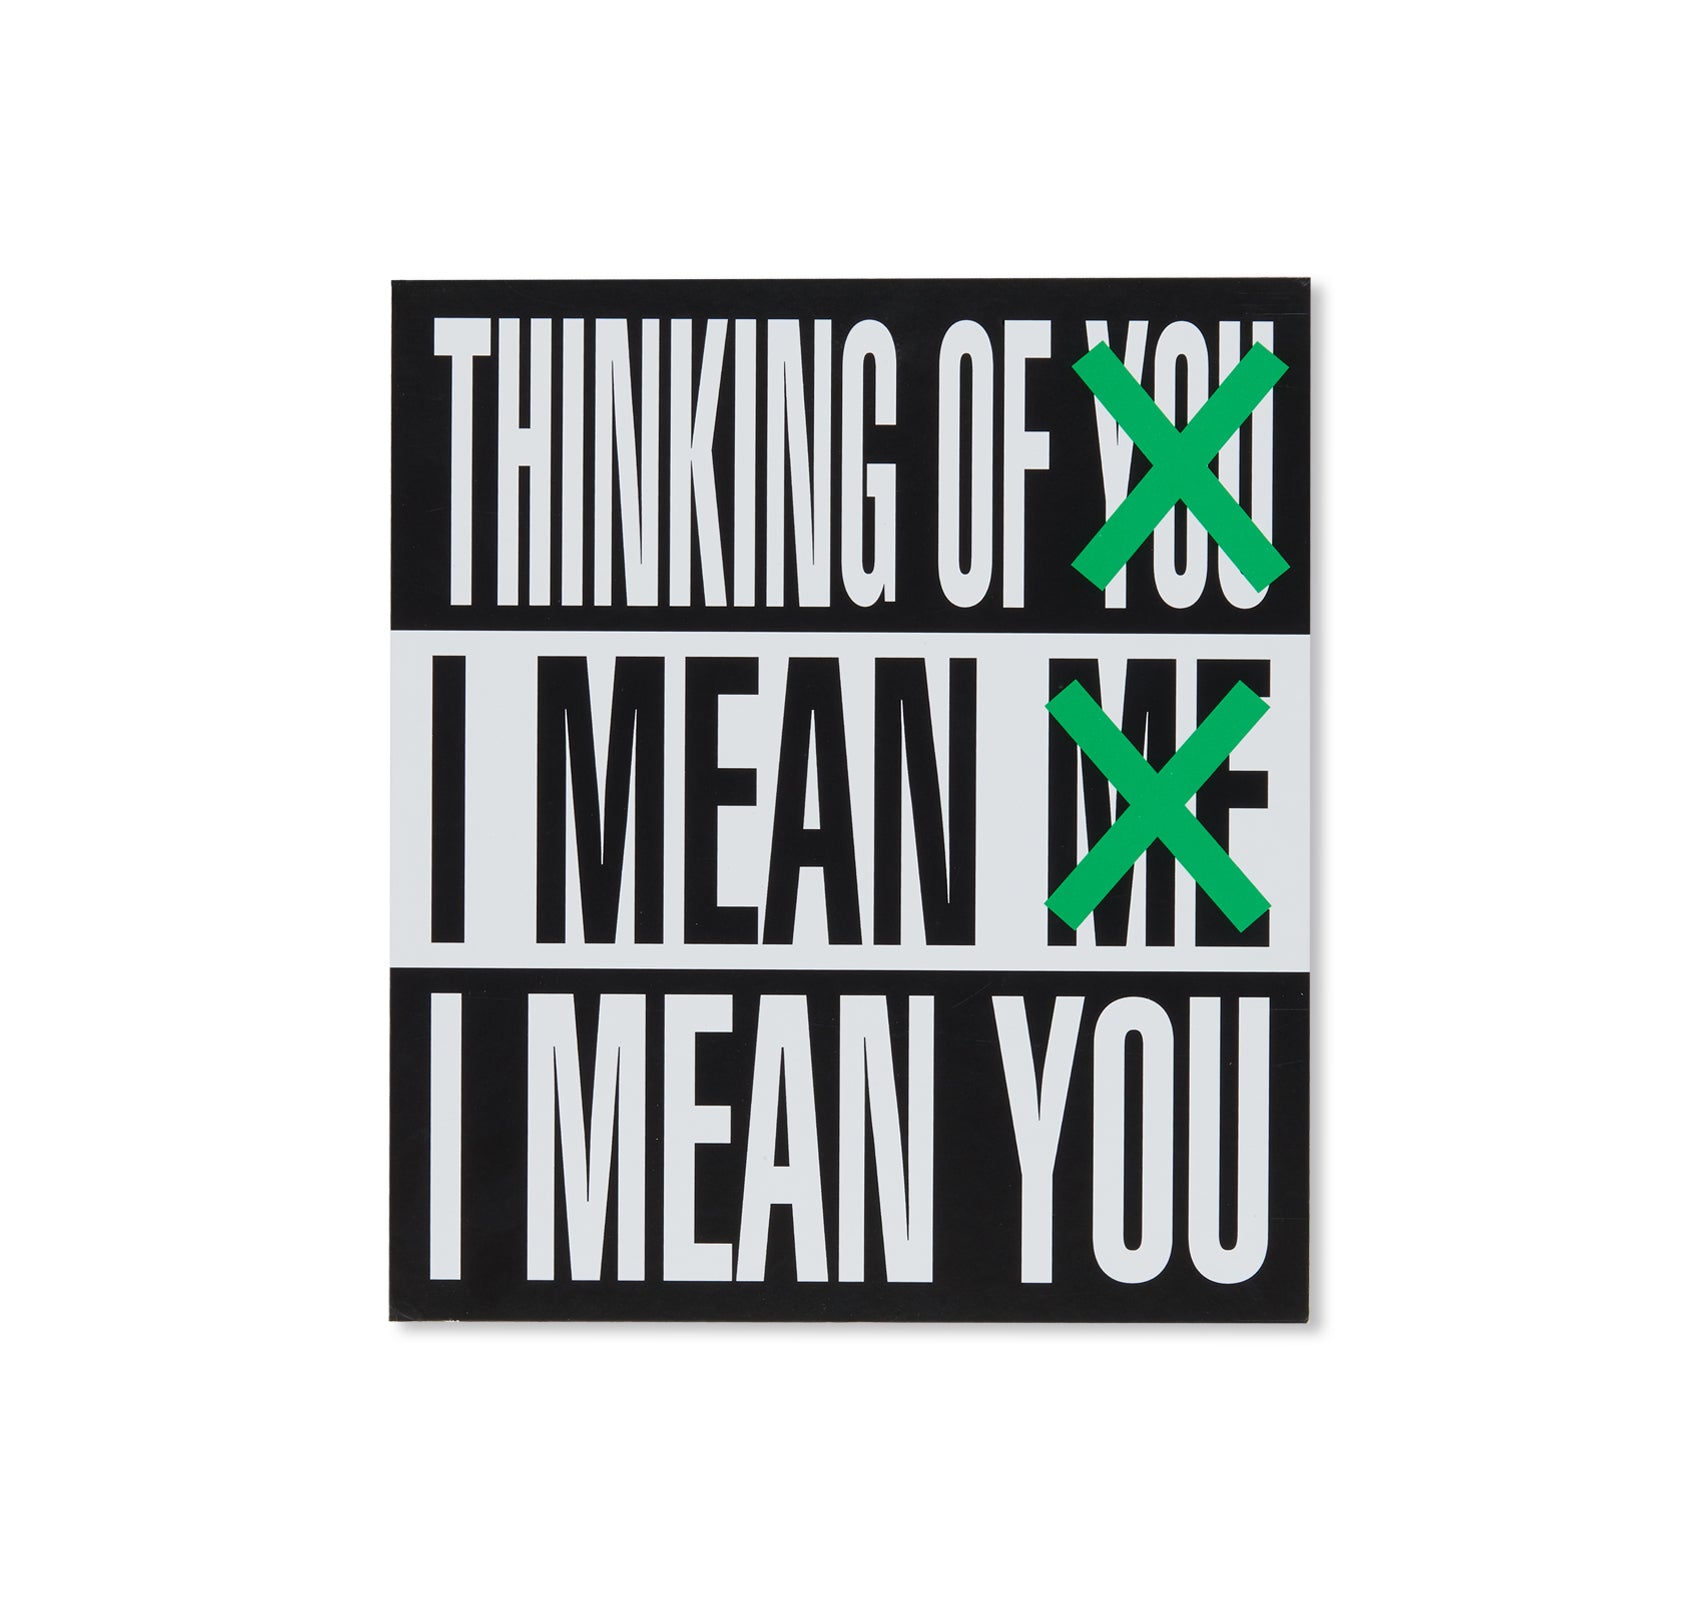 THINKING OF YOU. I MEAN ME. I MEAN YOU. by Barbara Kruger